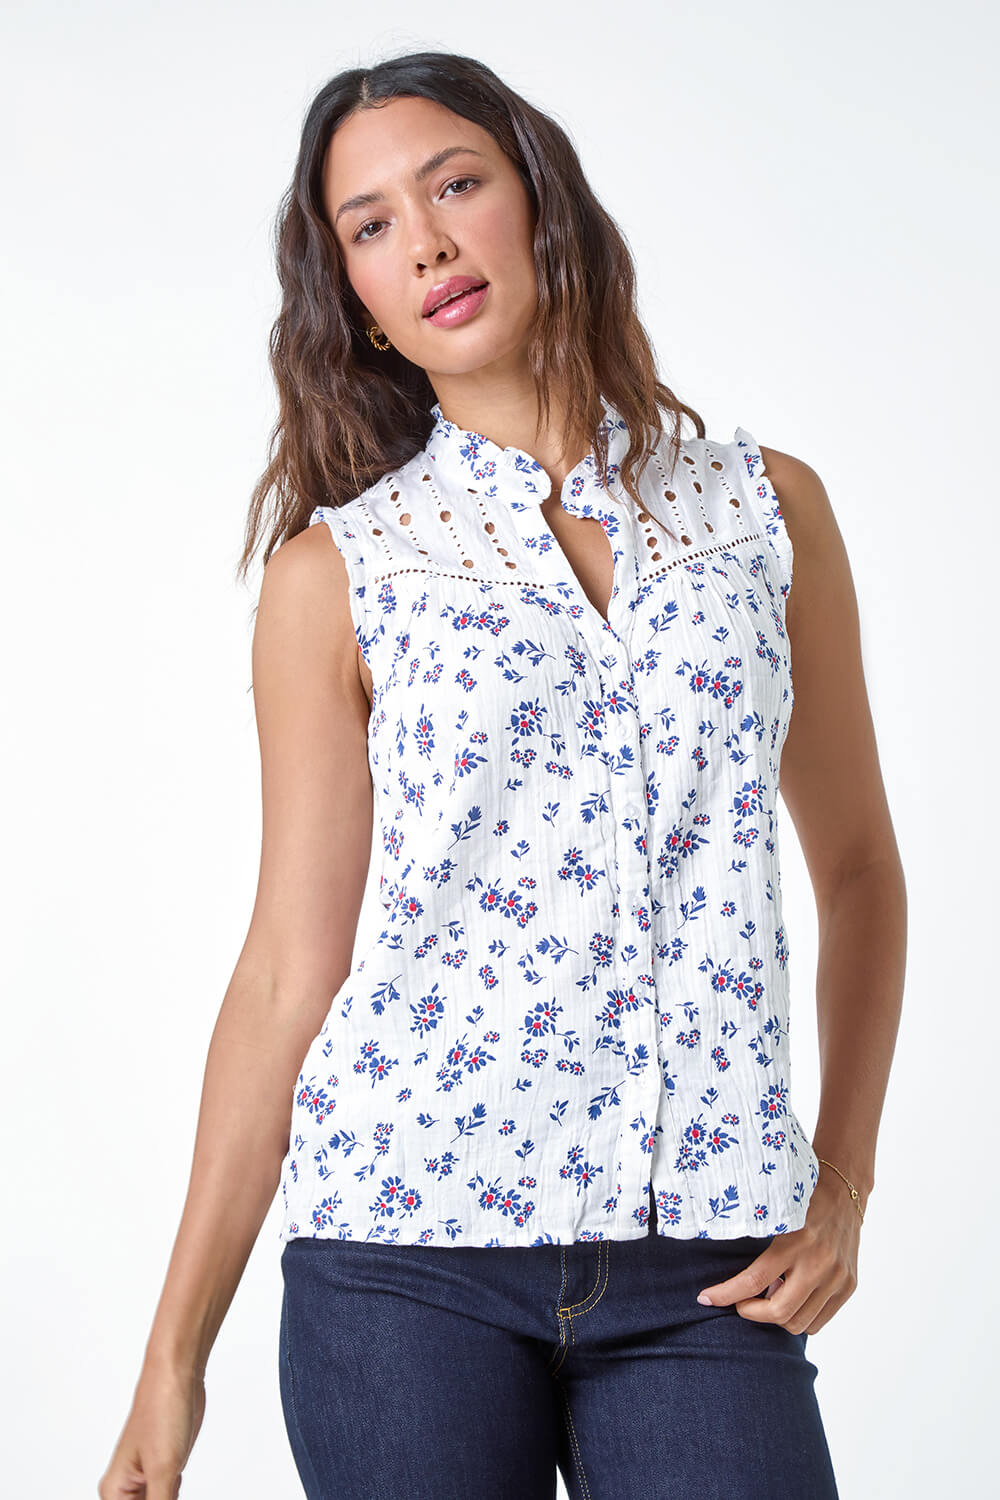 Blue Cotton Embroidered Floral Blouse, Image 4 of 5